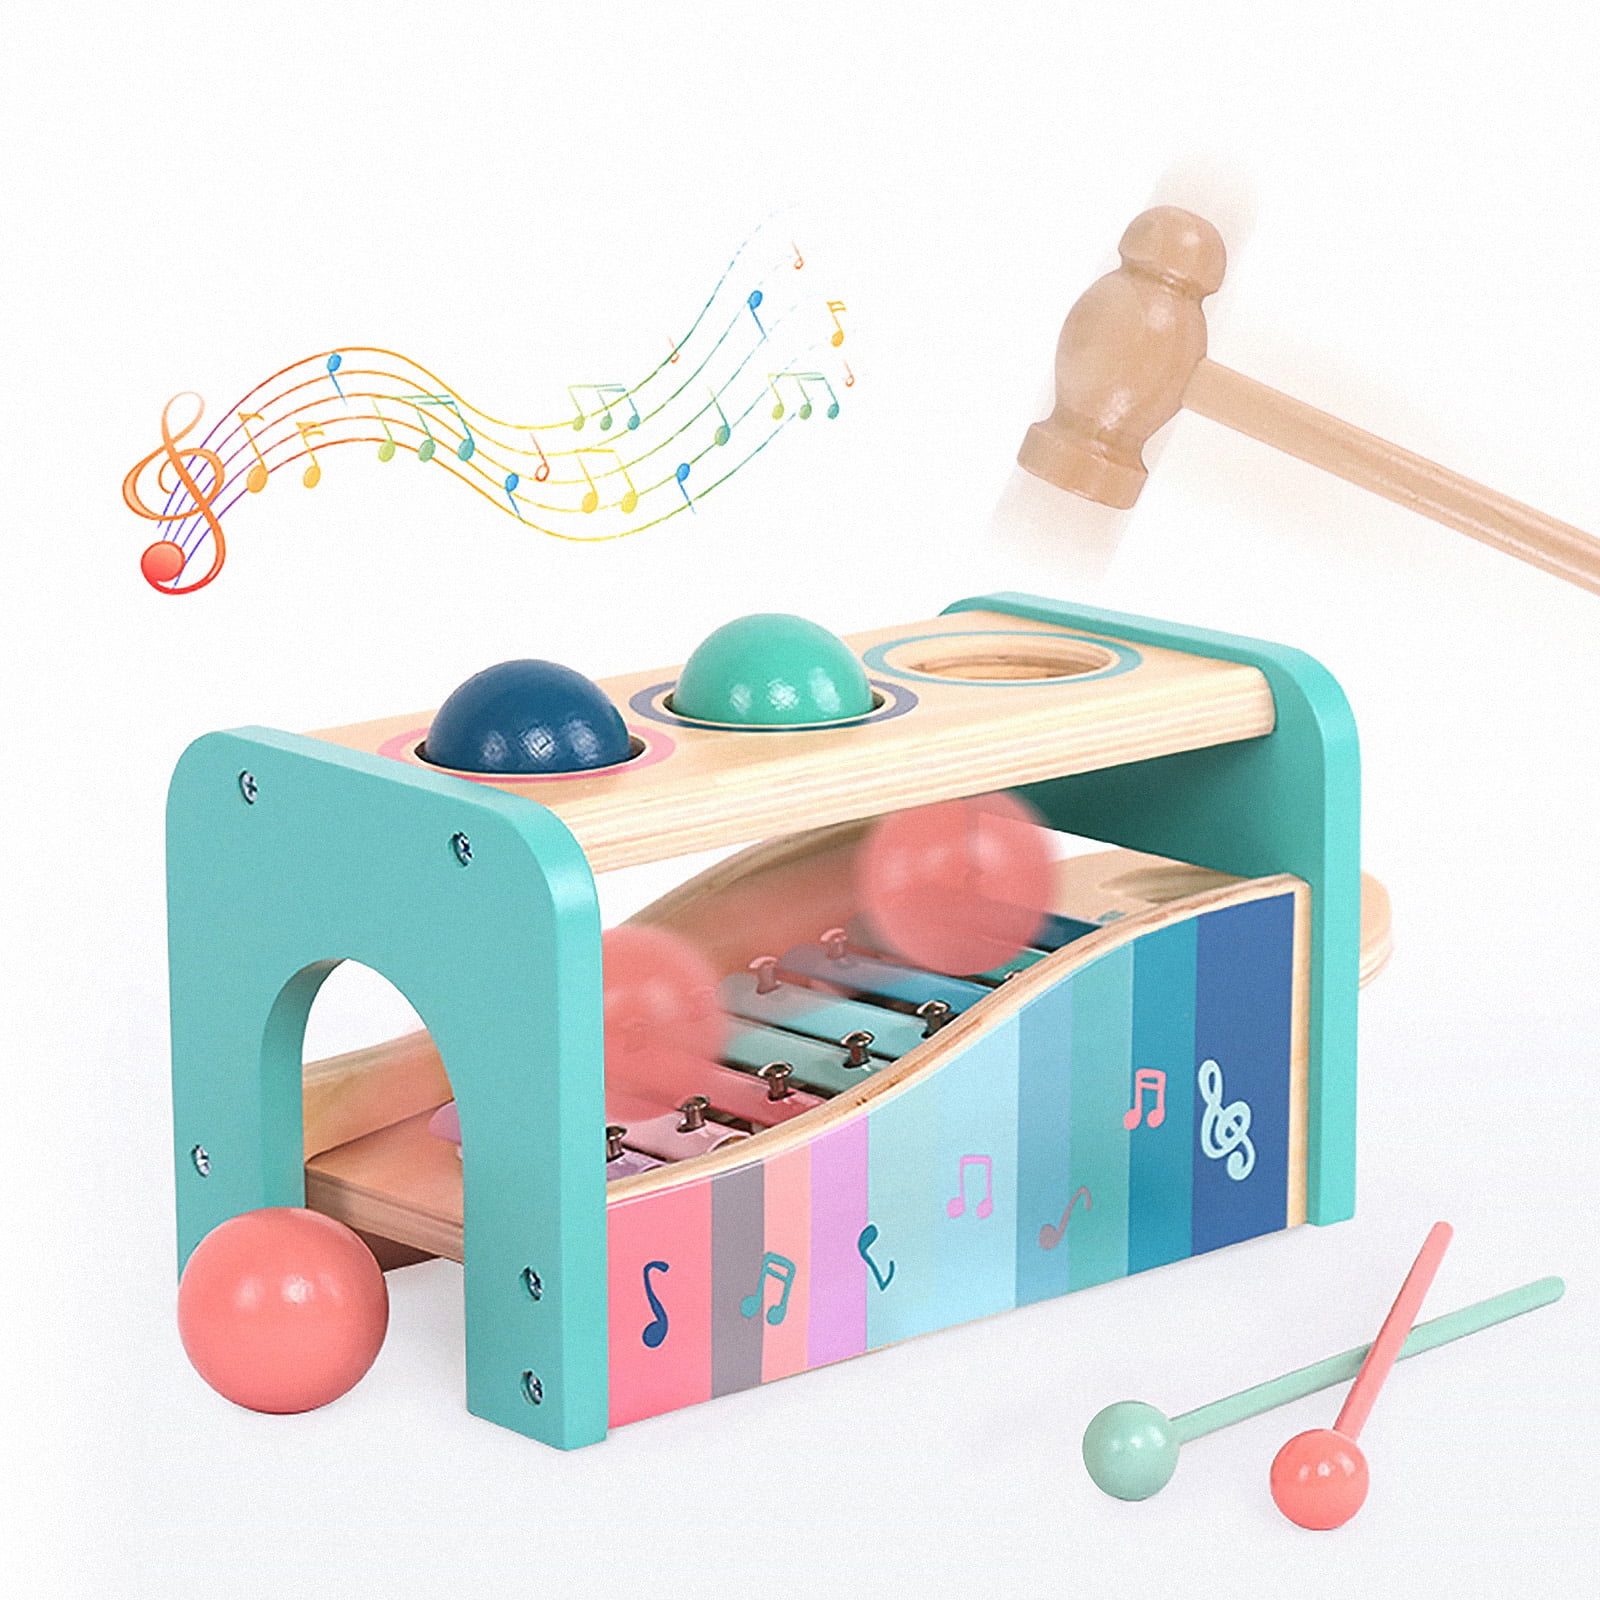 Montessori Wooden Pounding Bench with Mallet for Toddlers 